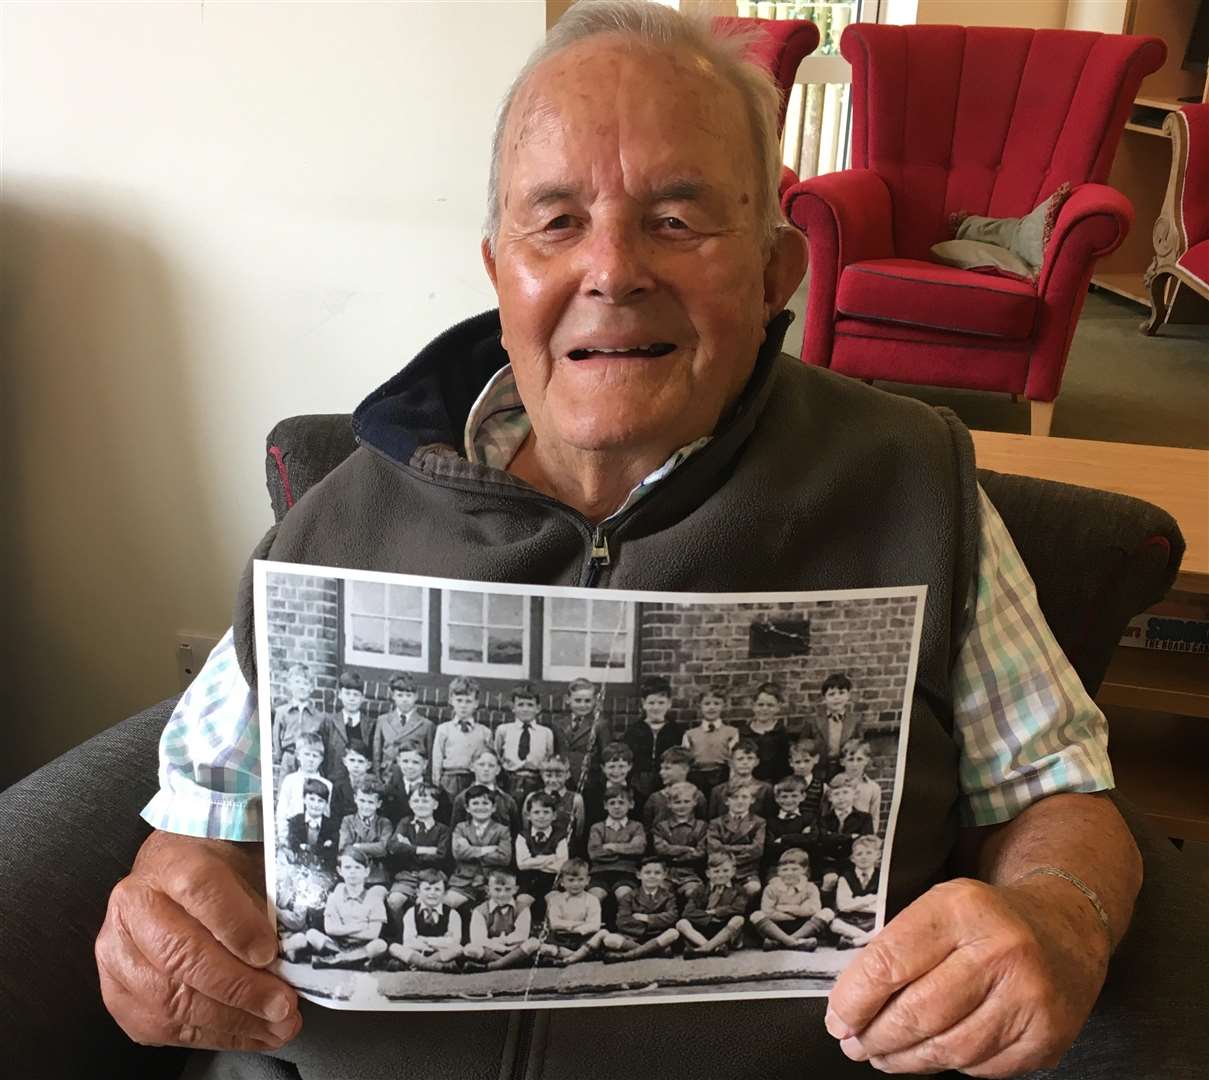 Retired teacher Douglas Champ says he immediately remembered the faces of every child in the photo